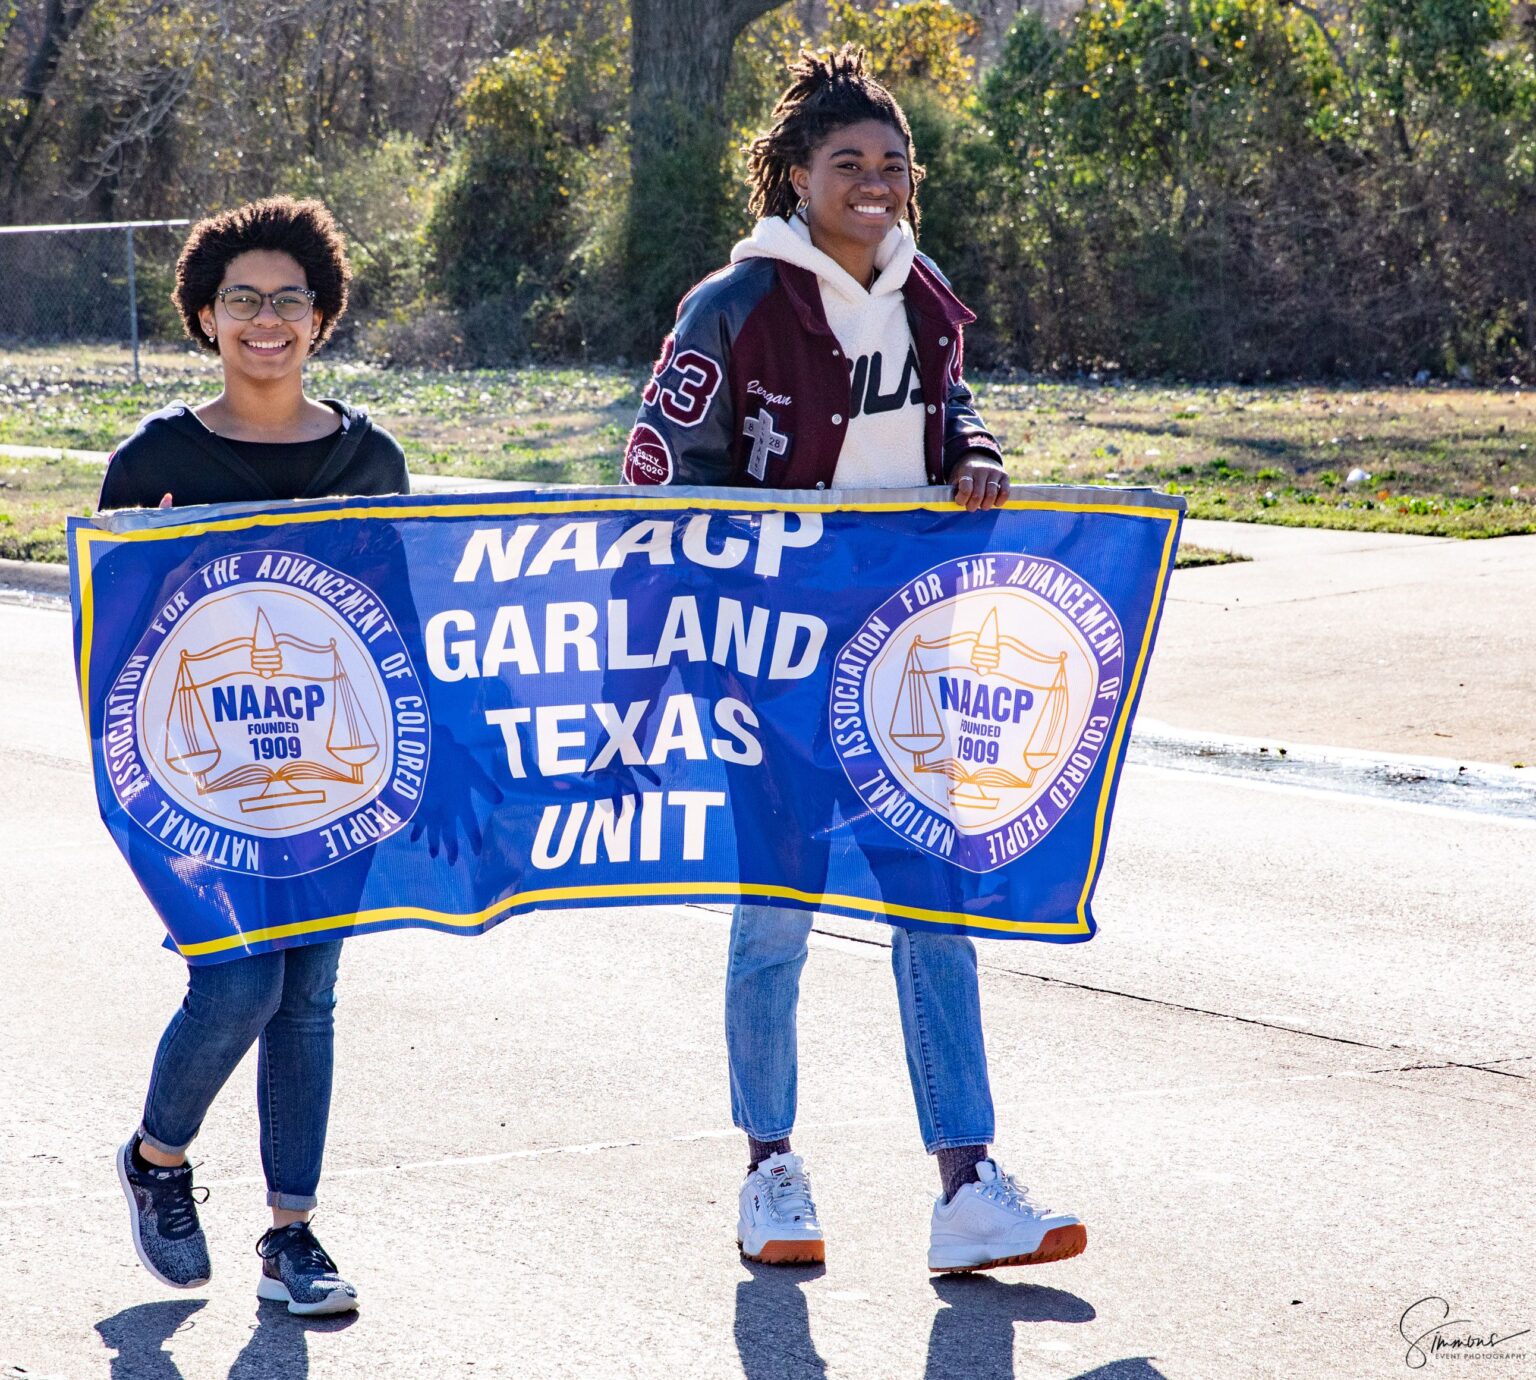 Garland NAACP 31st annual mlk parade and march 2020